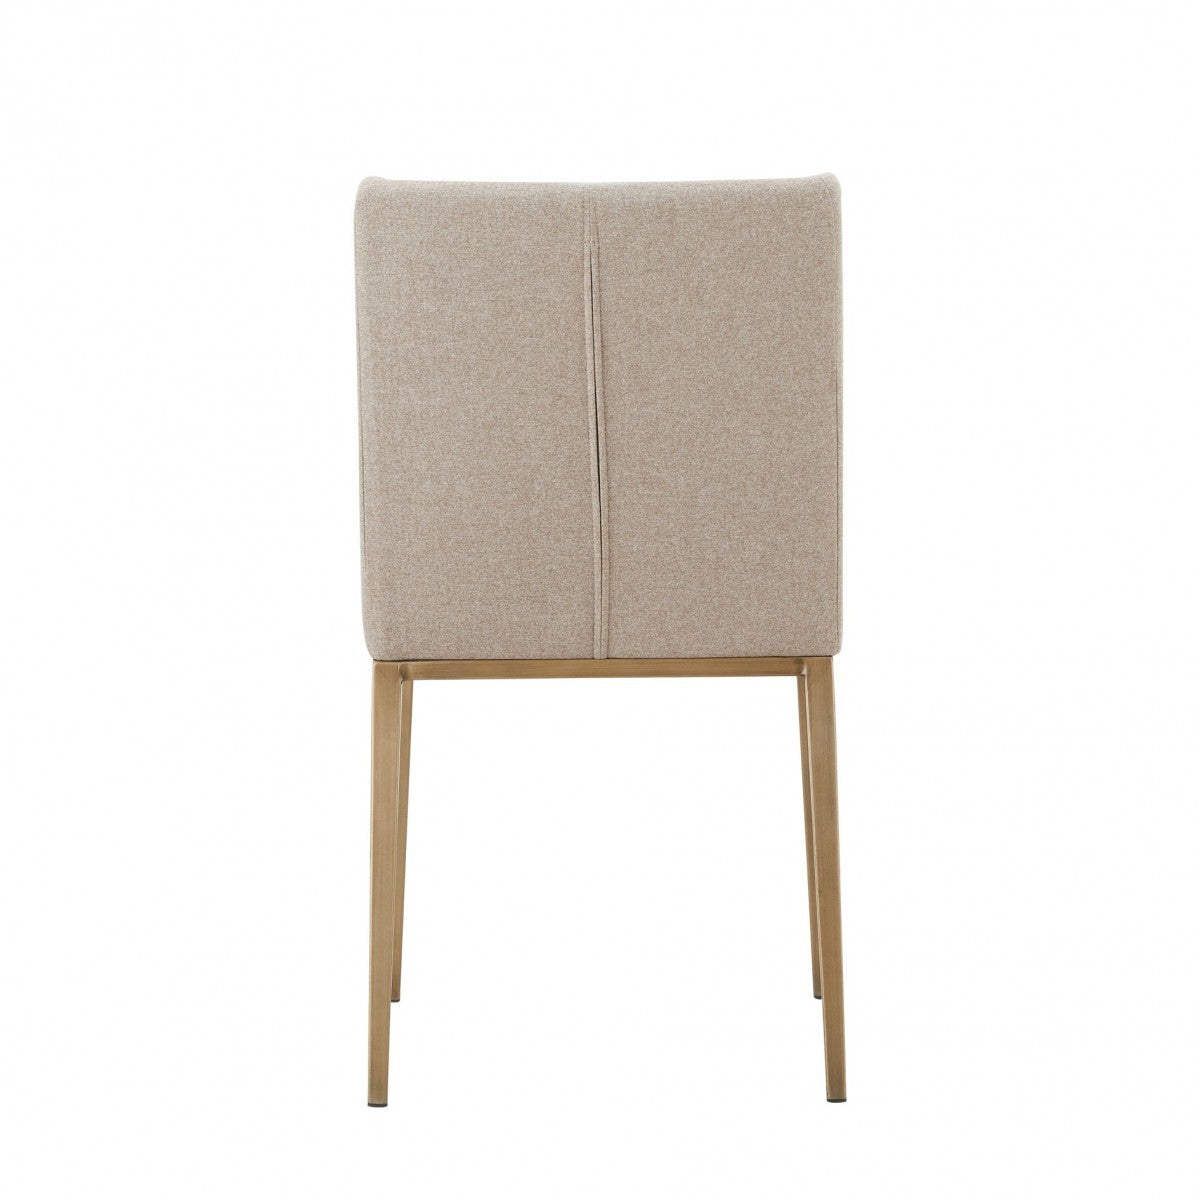 Set of Two Beige Brass Contemporary Dining Chairs